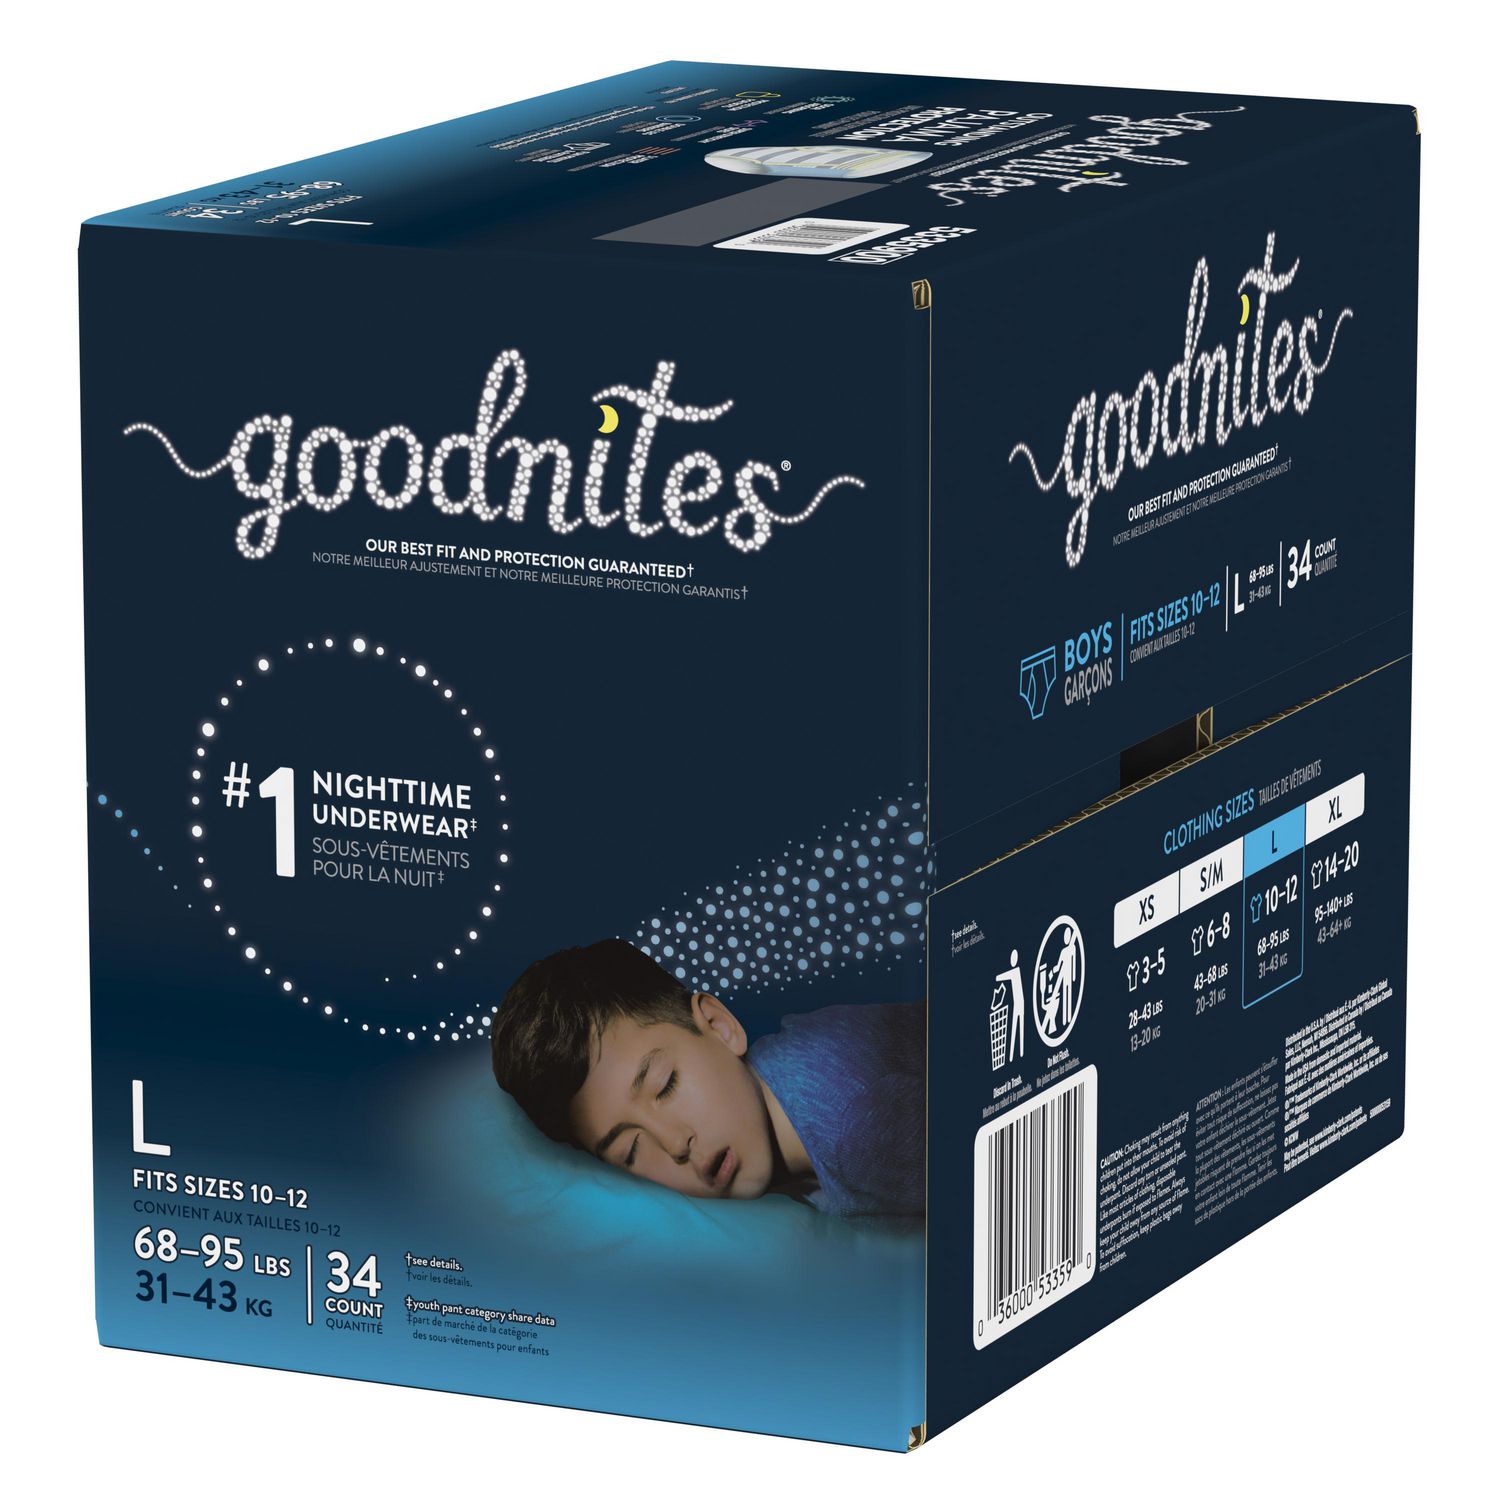 Goodnites NightTime Bedtime Underwear For Boys Fits Sizes10-12 (L) 11 Count